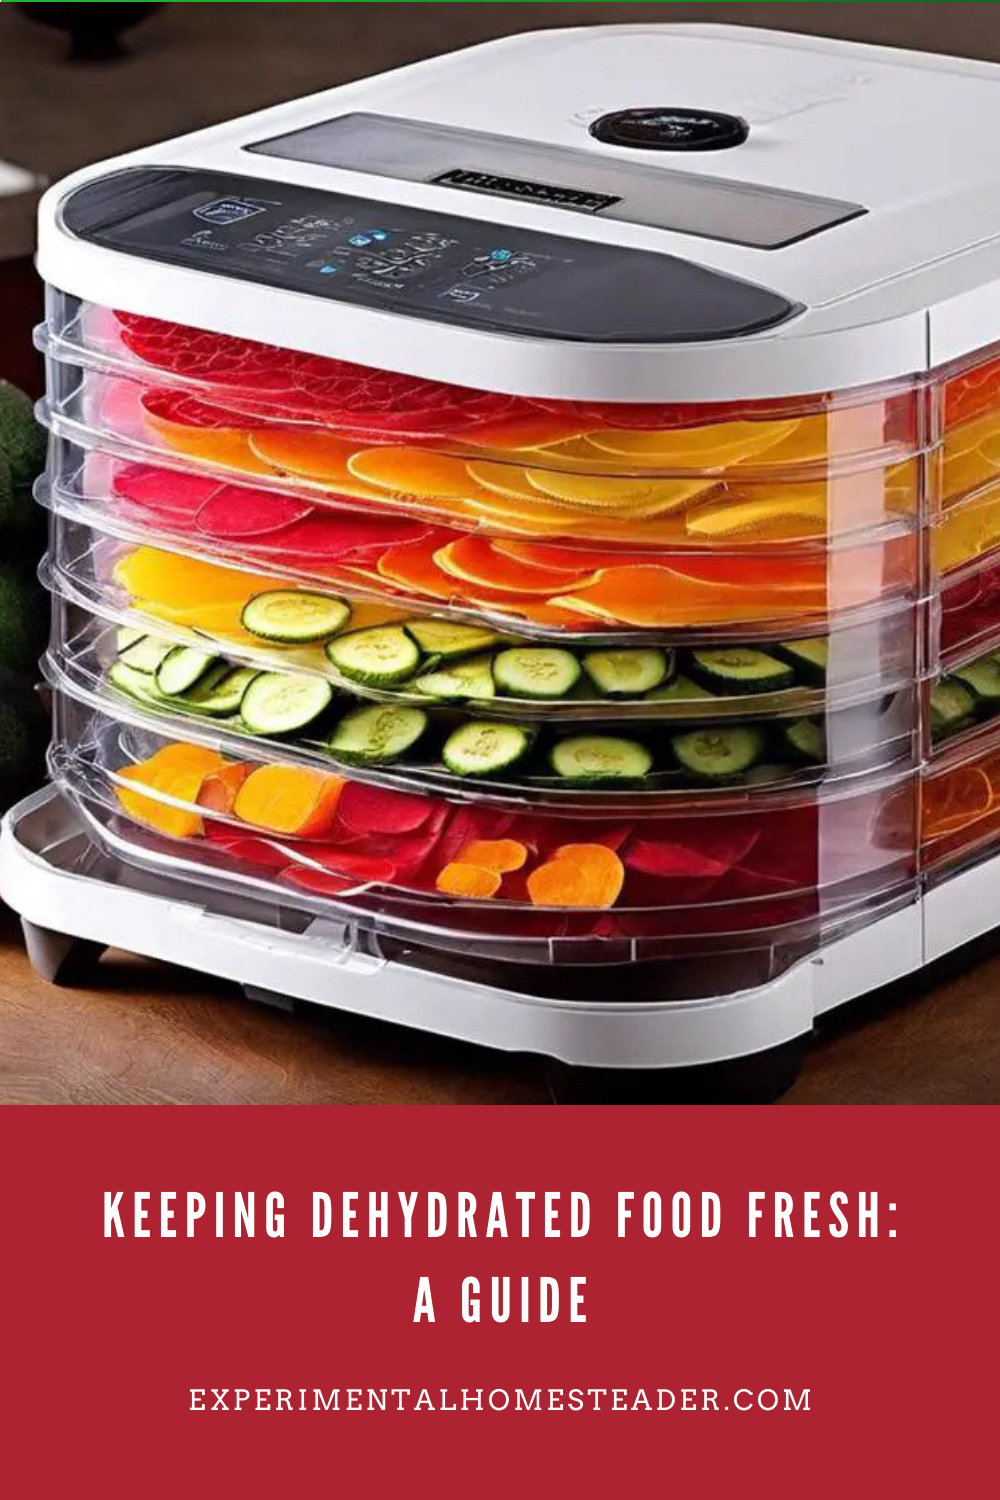 Fruits and vegetables in a dehydrator.